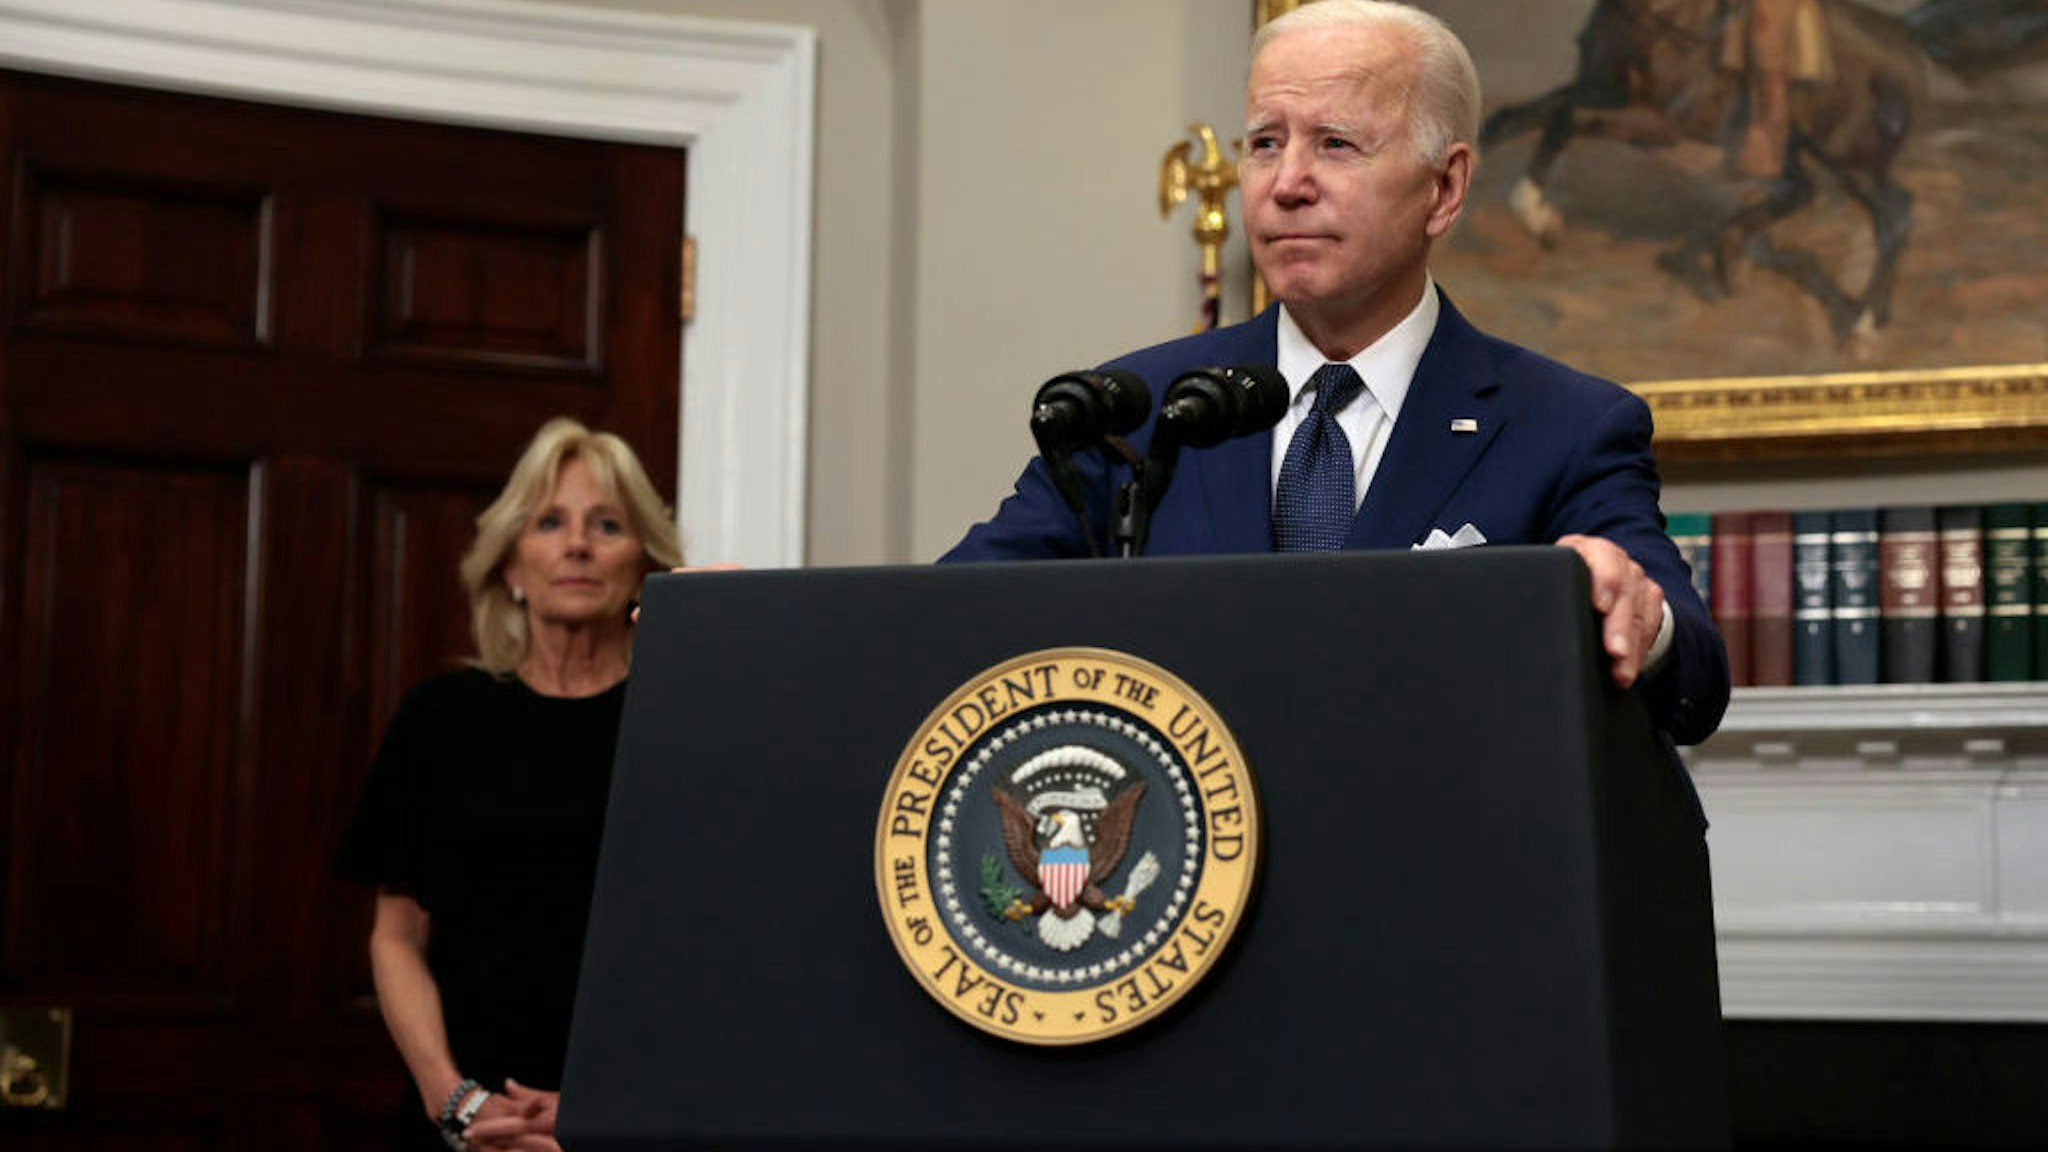 WASHINGTON, DC - MAY 24: U.S. President Joe Biden delivers remarks from the Roosevelt Room of the White House as first lady Jill Biden looks on concerning the mass shooting at a Texas elementary school on May 24, 2022 in Washington, DC. Eighteen people are dead after a gunman today opened fire at the Robb Elementary School in Uvalde, Texas, according to published reports. (Photo by Anna Moneymaker/Getty Images)